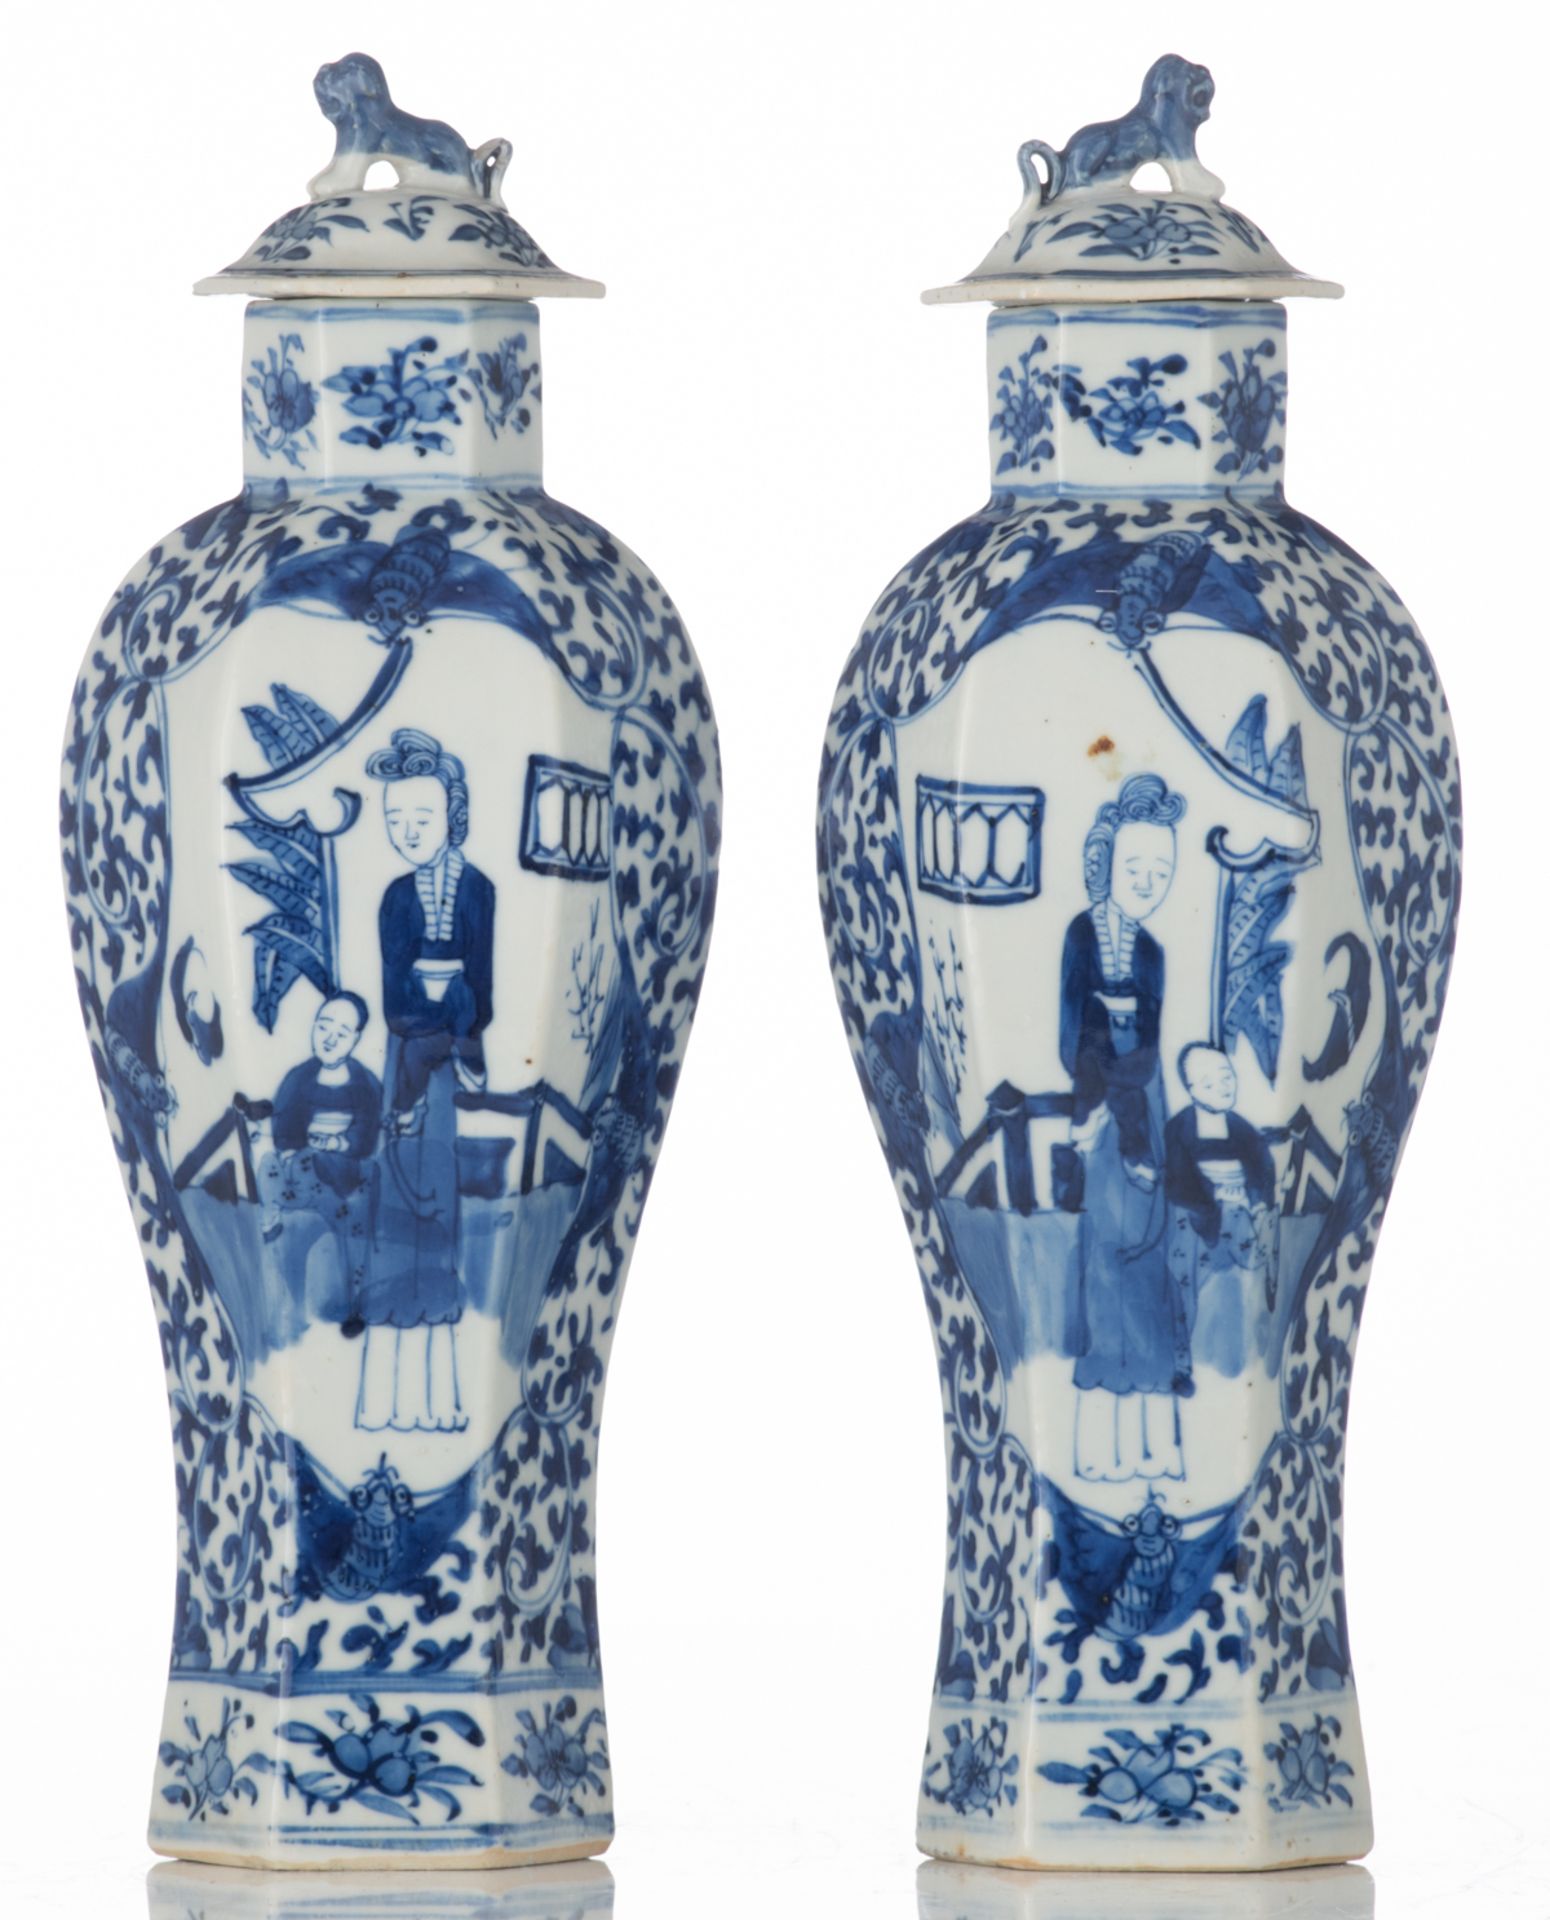 A pair of Chinese hexagonal porcelain vases and covers, blue and white decorated with figures in a p - Image 3 of 7